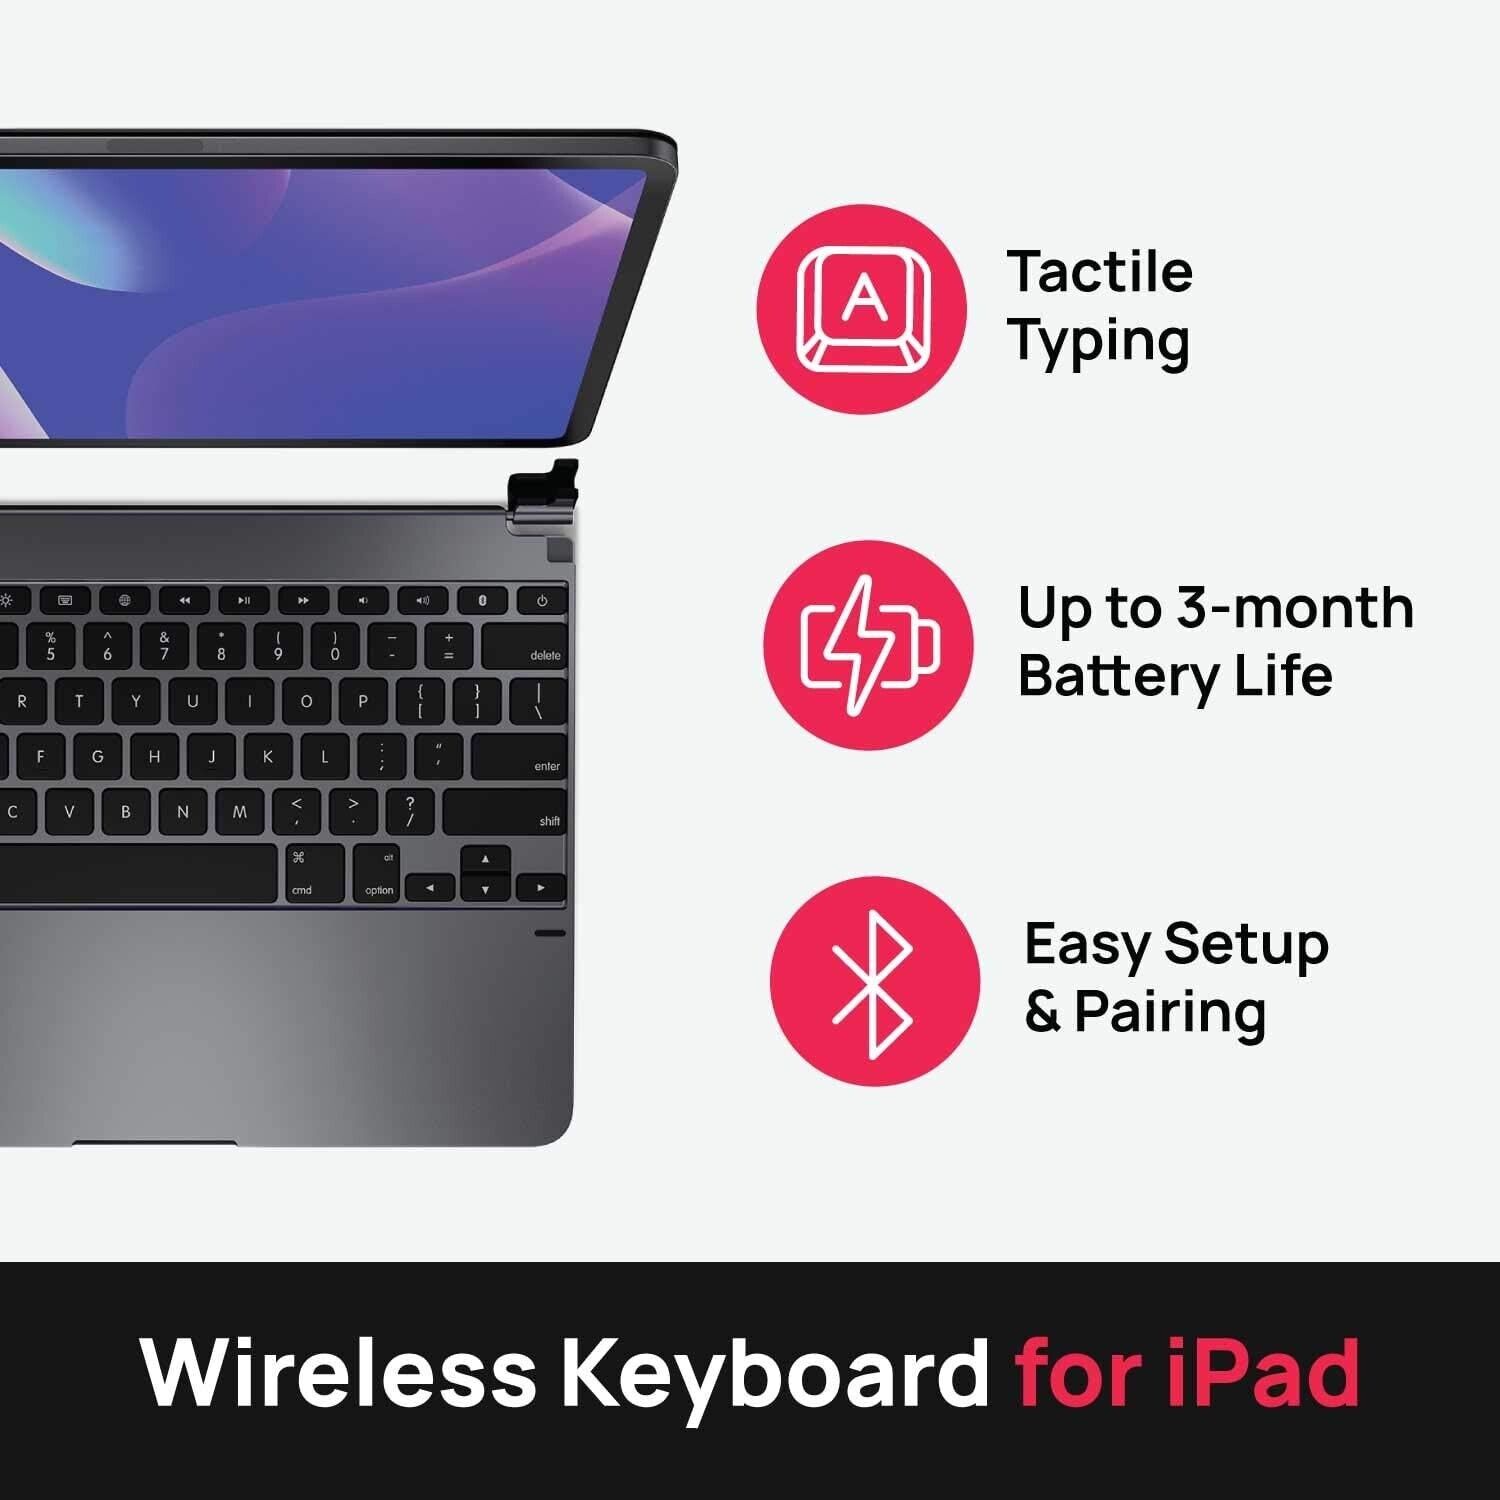 Brydge Wireless Keyboard & Magnetic Cover for 12.9-inch iPad Pro (3rd Gen, 2018)